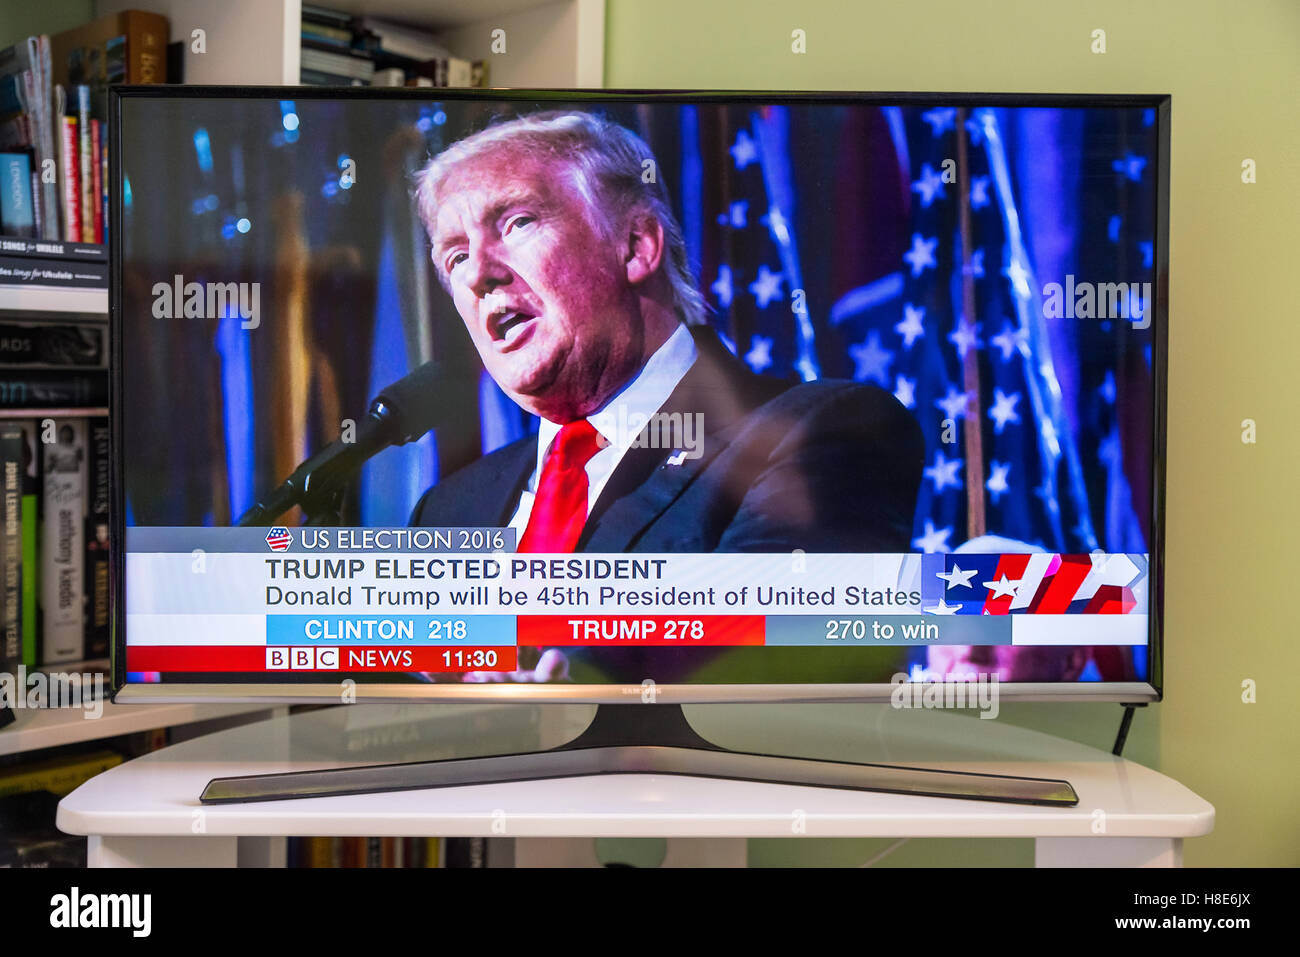 UK - NOV 9TH 2016: A shot of a TV showing the BBC News channel with live breaking news that Donald Trump is elected President. Stock Photo